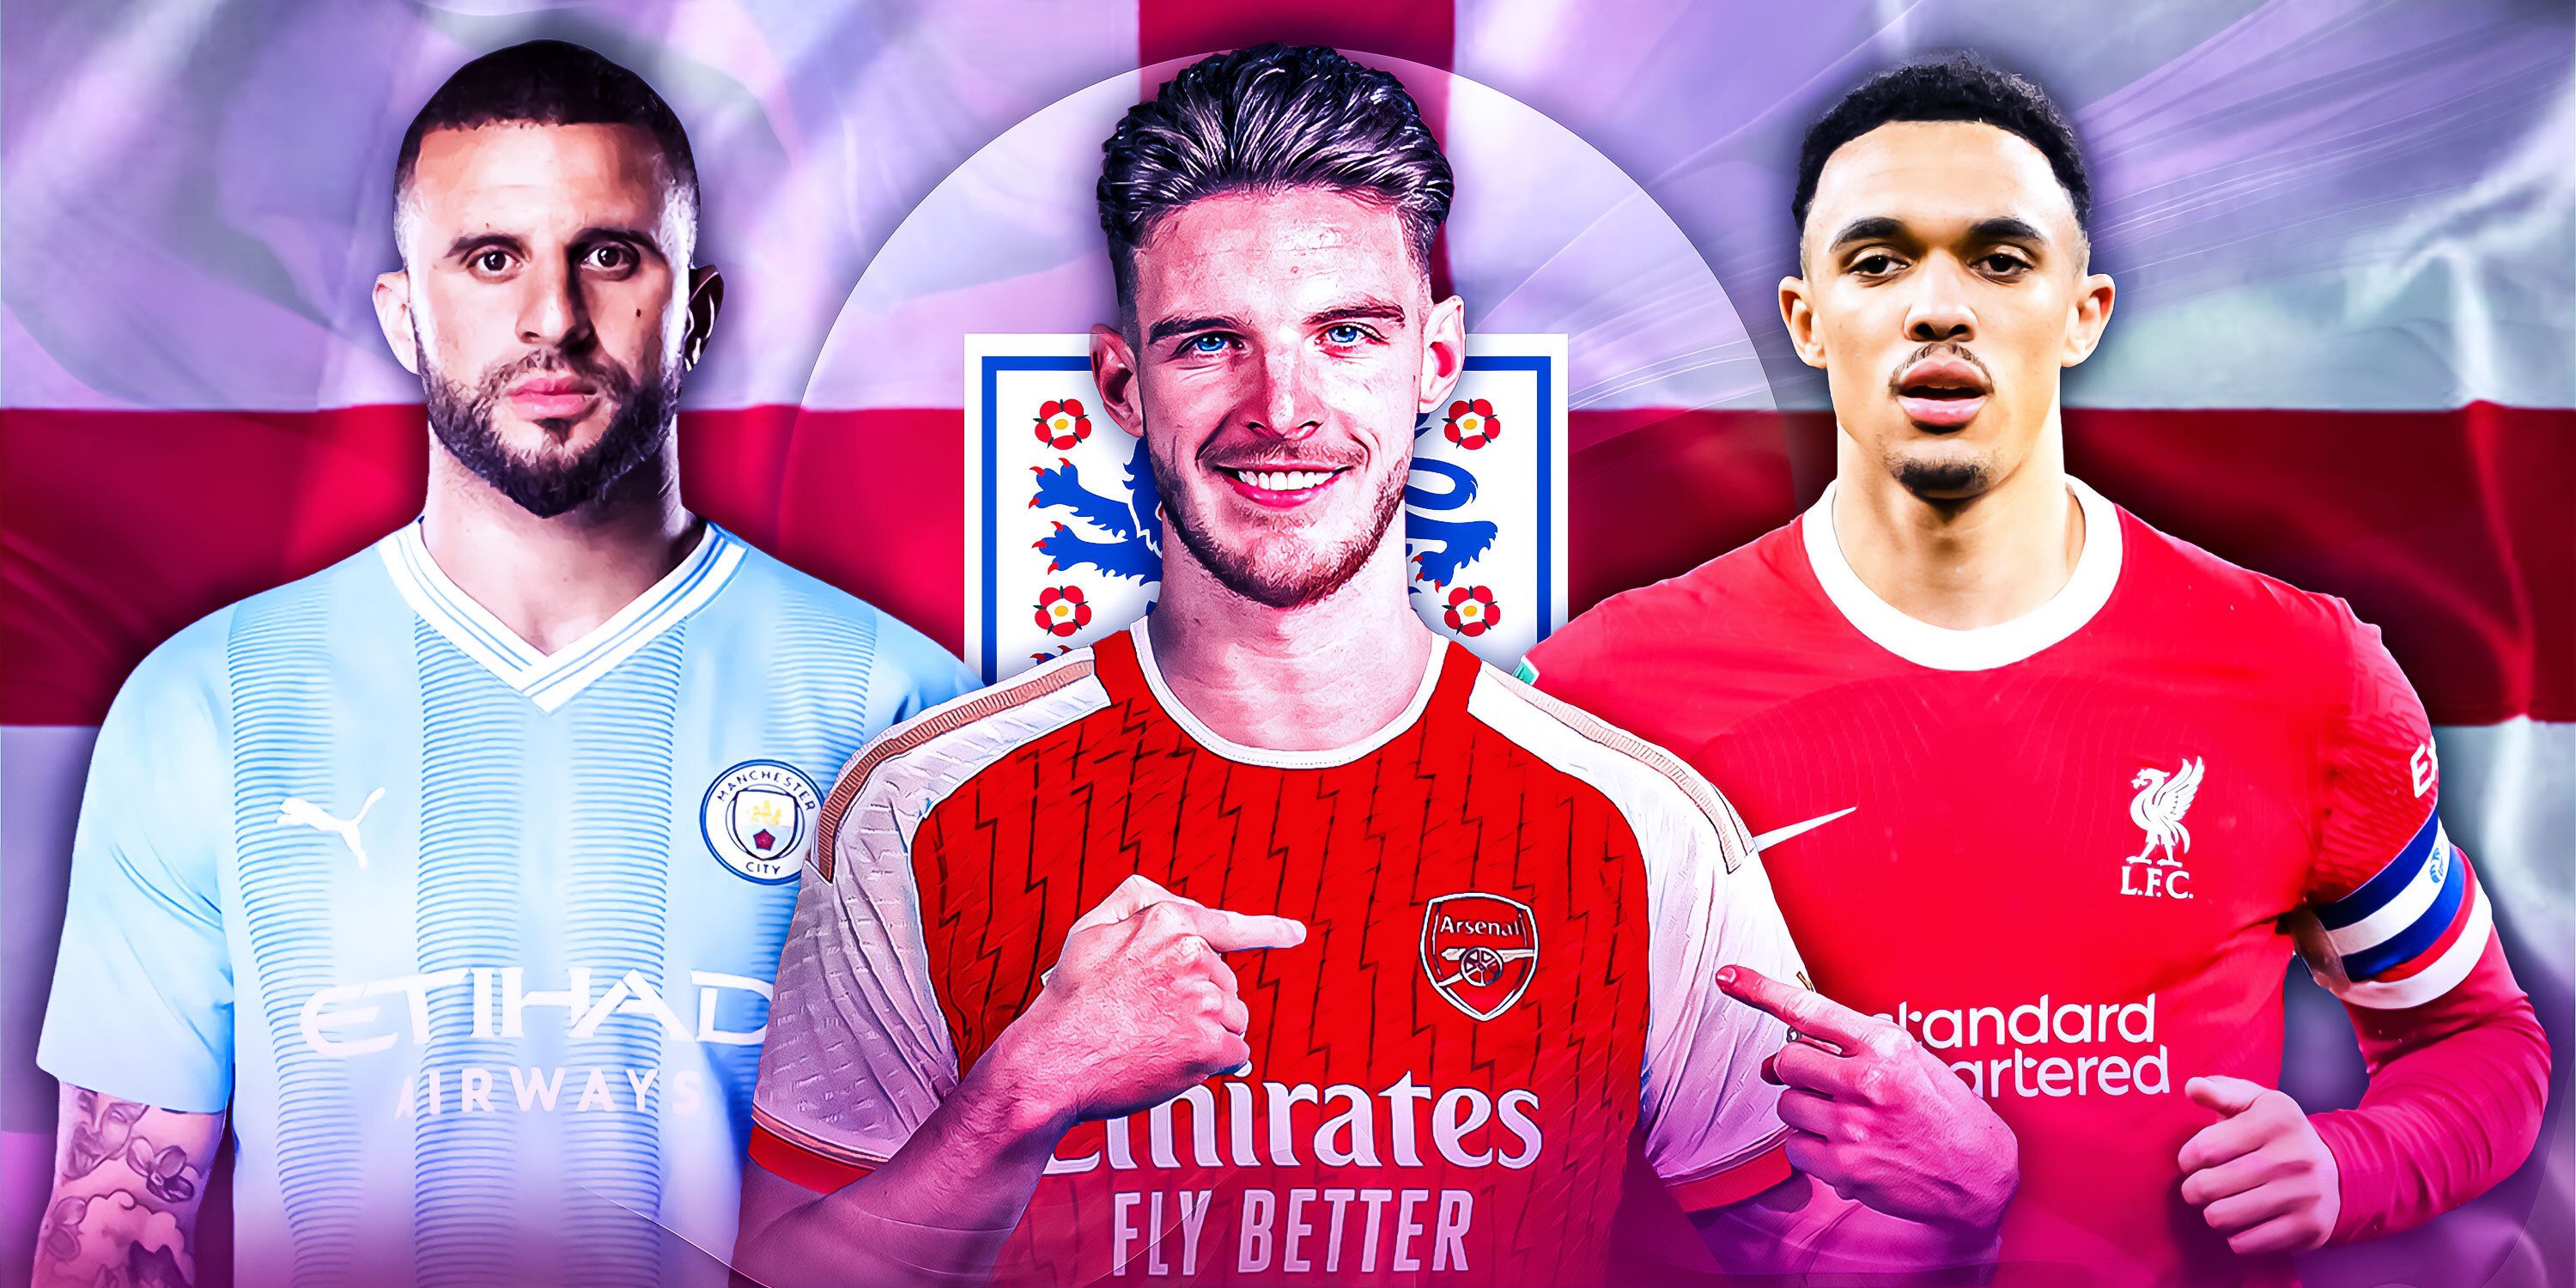 A composite image of Manchester City's Kyle Walker, Declan Rice of Arsenal and Liverpool full-back Trent Alexander Arnold